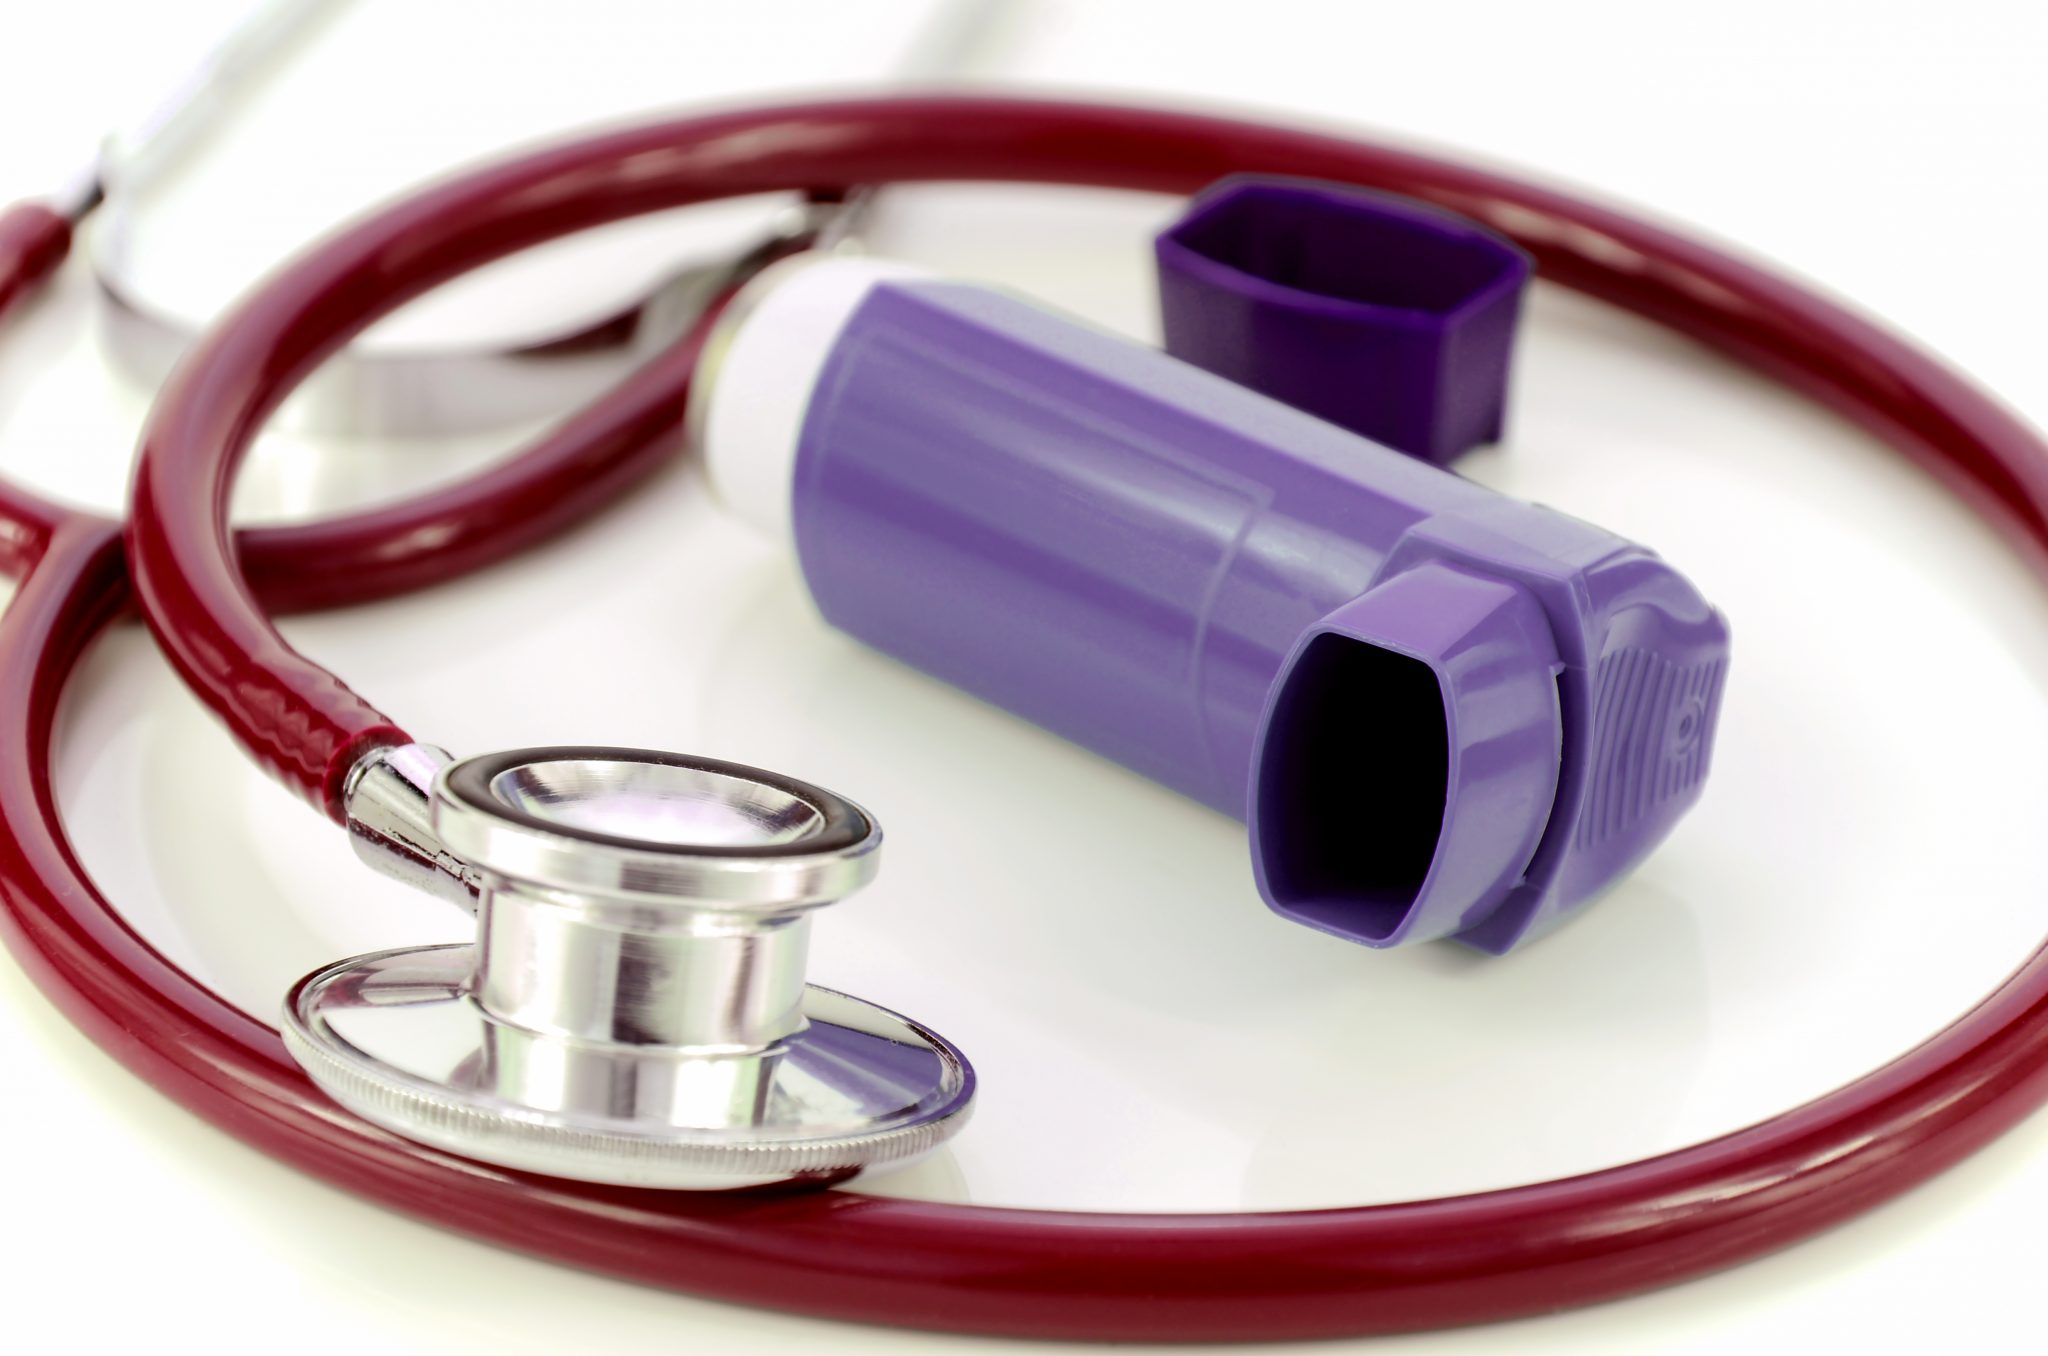 Asthma in real life: diagnosis & treatment